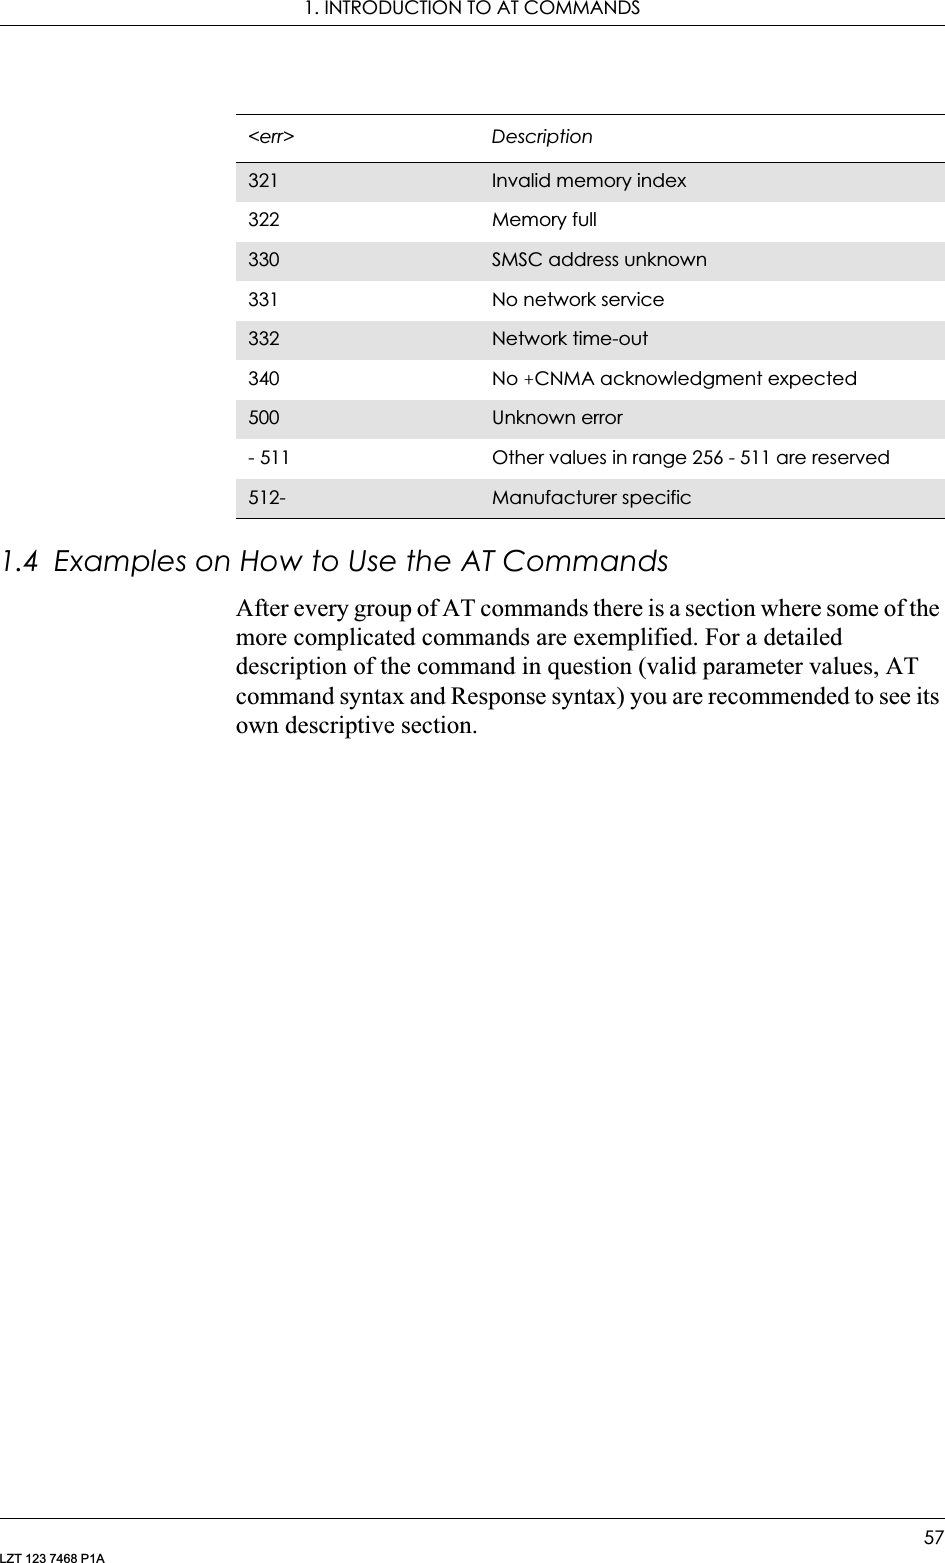 1. INTRODUCTION TO AT COMMANDS57LZT 123 7468 P1A1.4  Examples on How to Use the AT CommandsAfter every group of AT commands there is a section where some of the more complicated commands are exemplified. For a detailed description of the command in question (valid parameter values, AT command syntax and Response syntax) you are recommended to see its own descriptive section.321 Invalid memory index322 Memory full330 SMSC address unknown331 No network service332 Network time-out340 No +CNMA acknowledgment expected500 Unknown error- 511 Other values in range 256 - 511 are reserved512- Manufacturer specific&lt;err&gt; Description